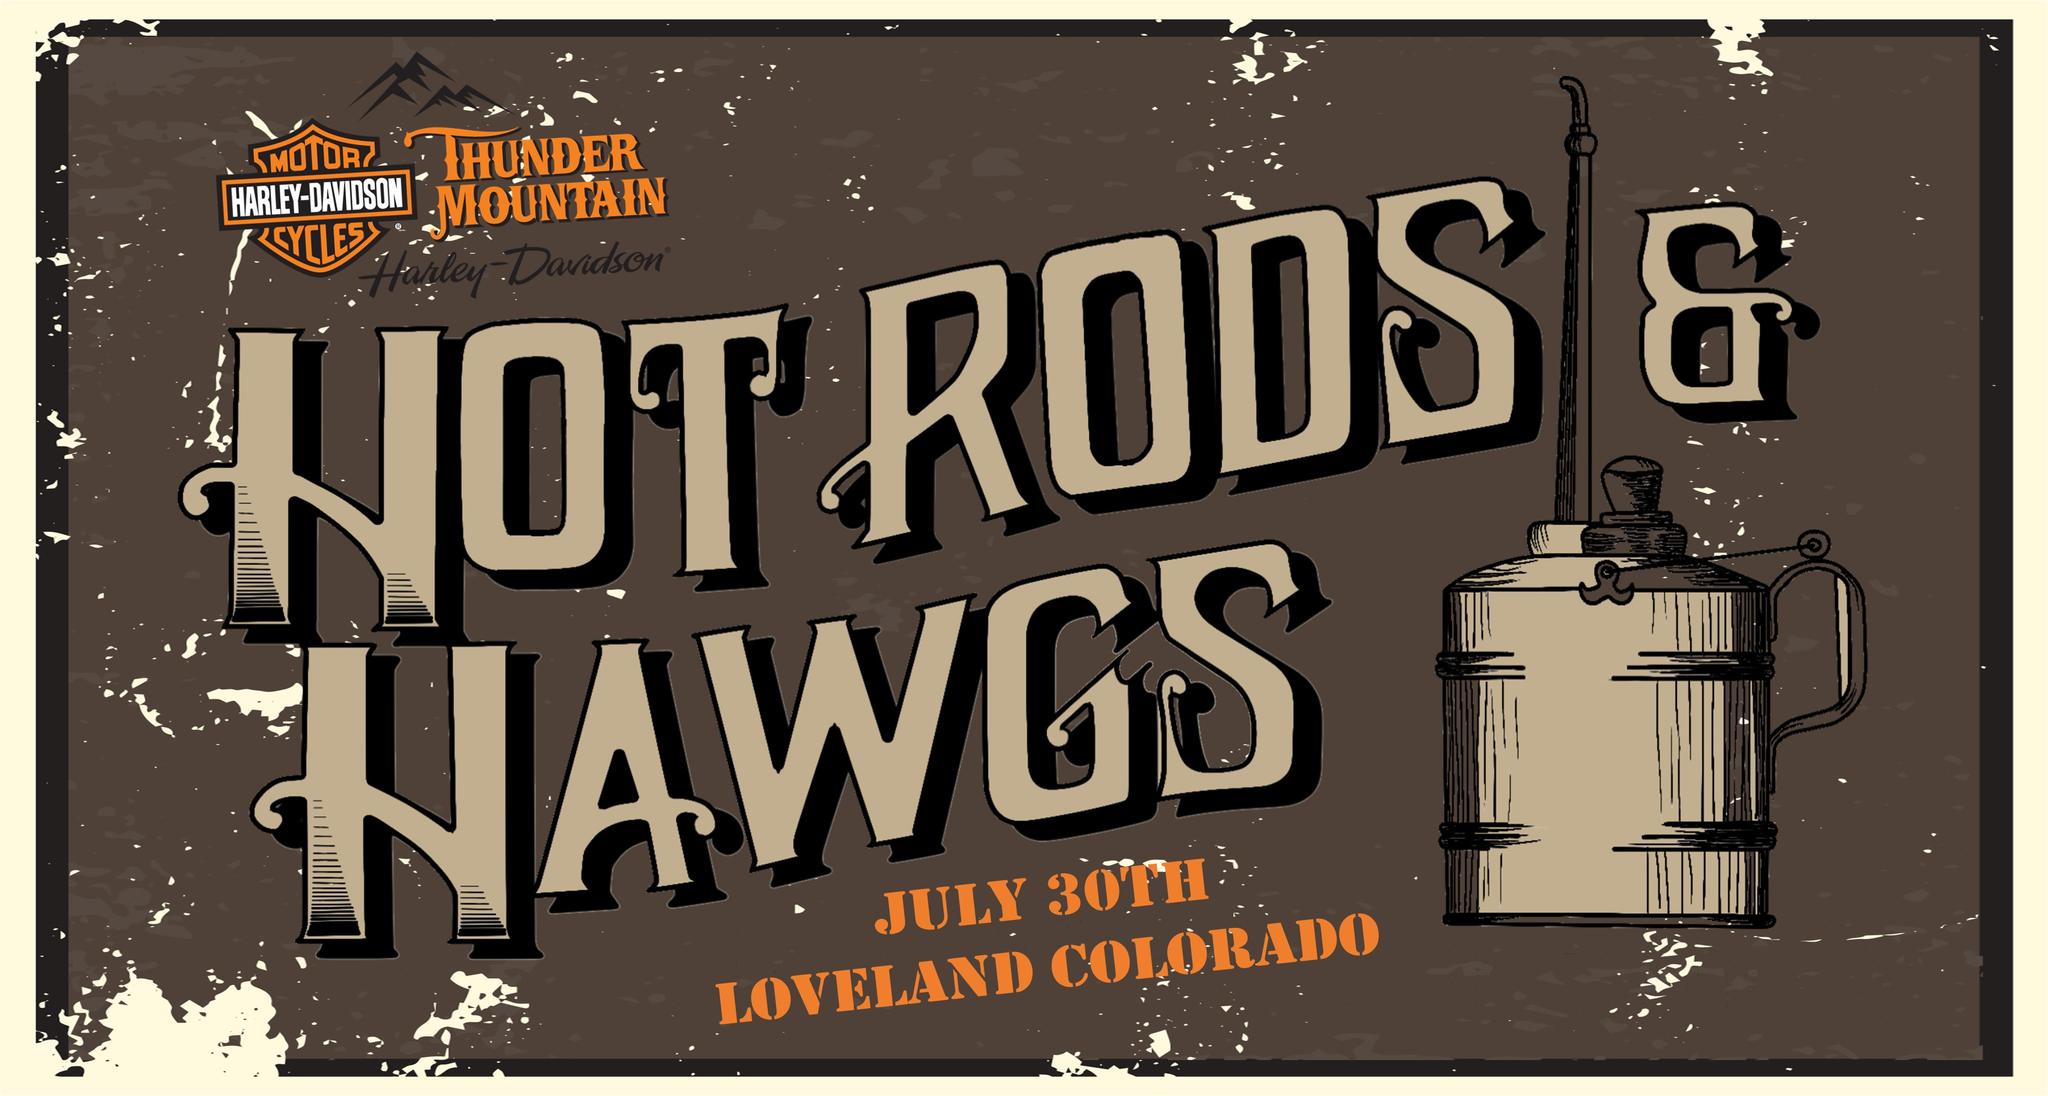 Hot rods and hawgs logo